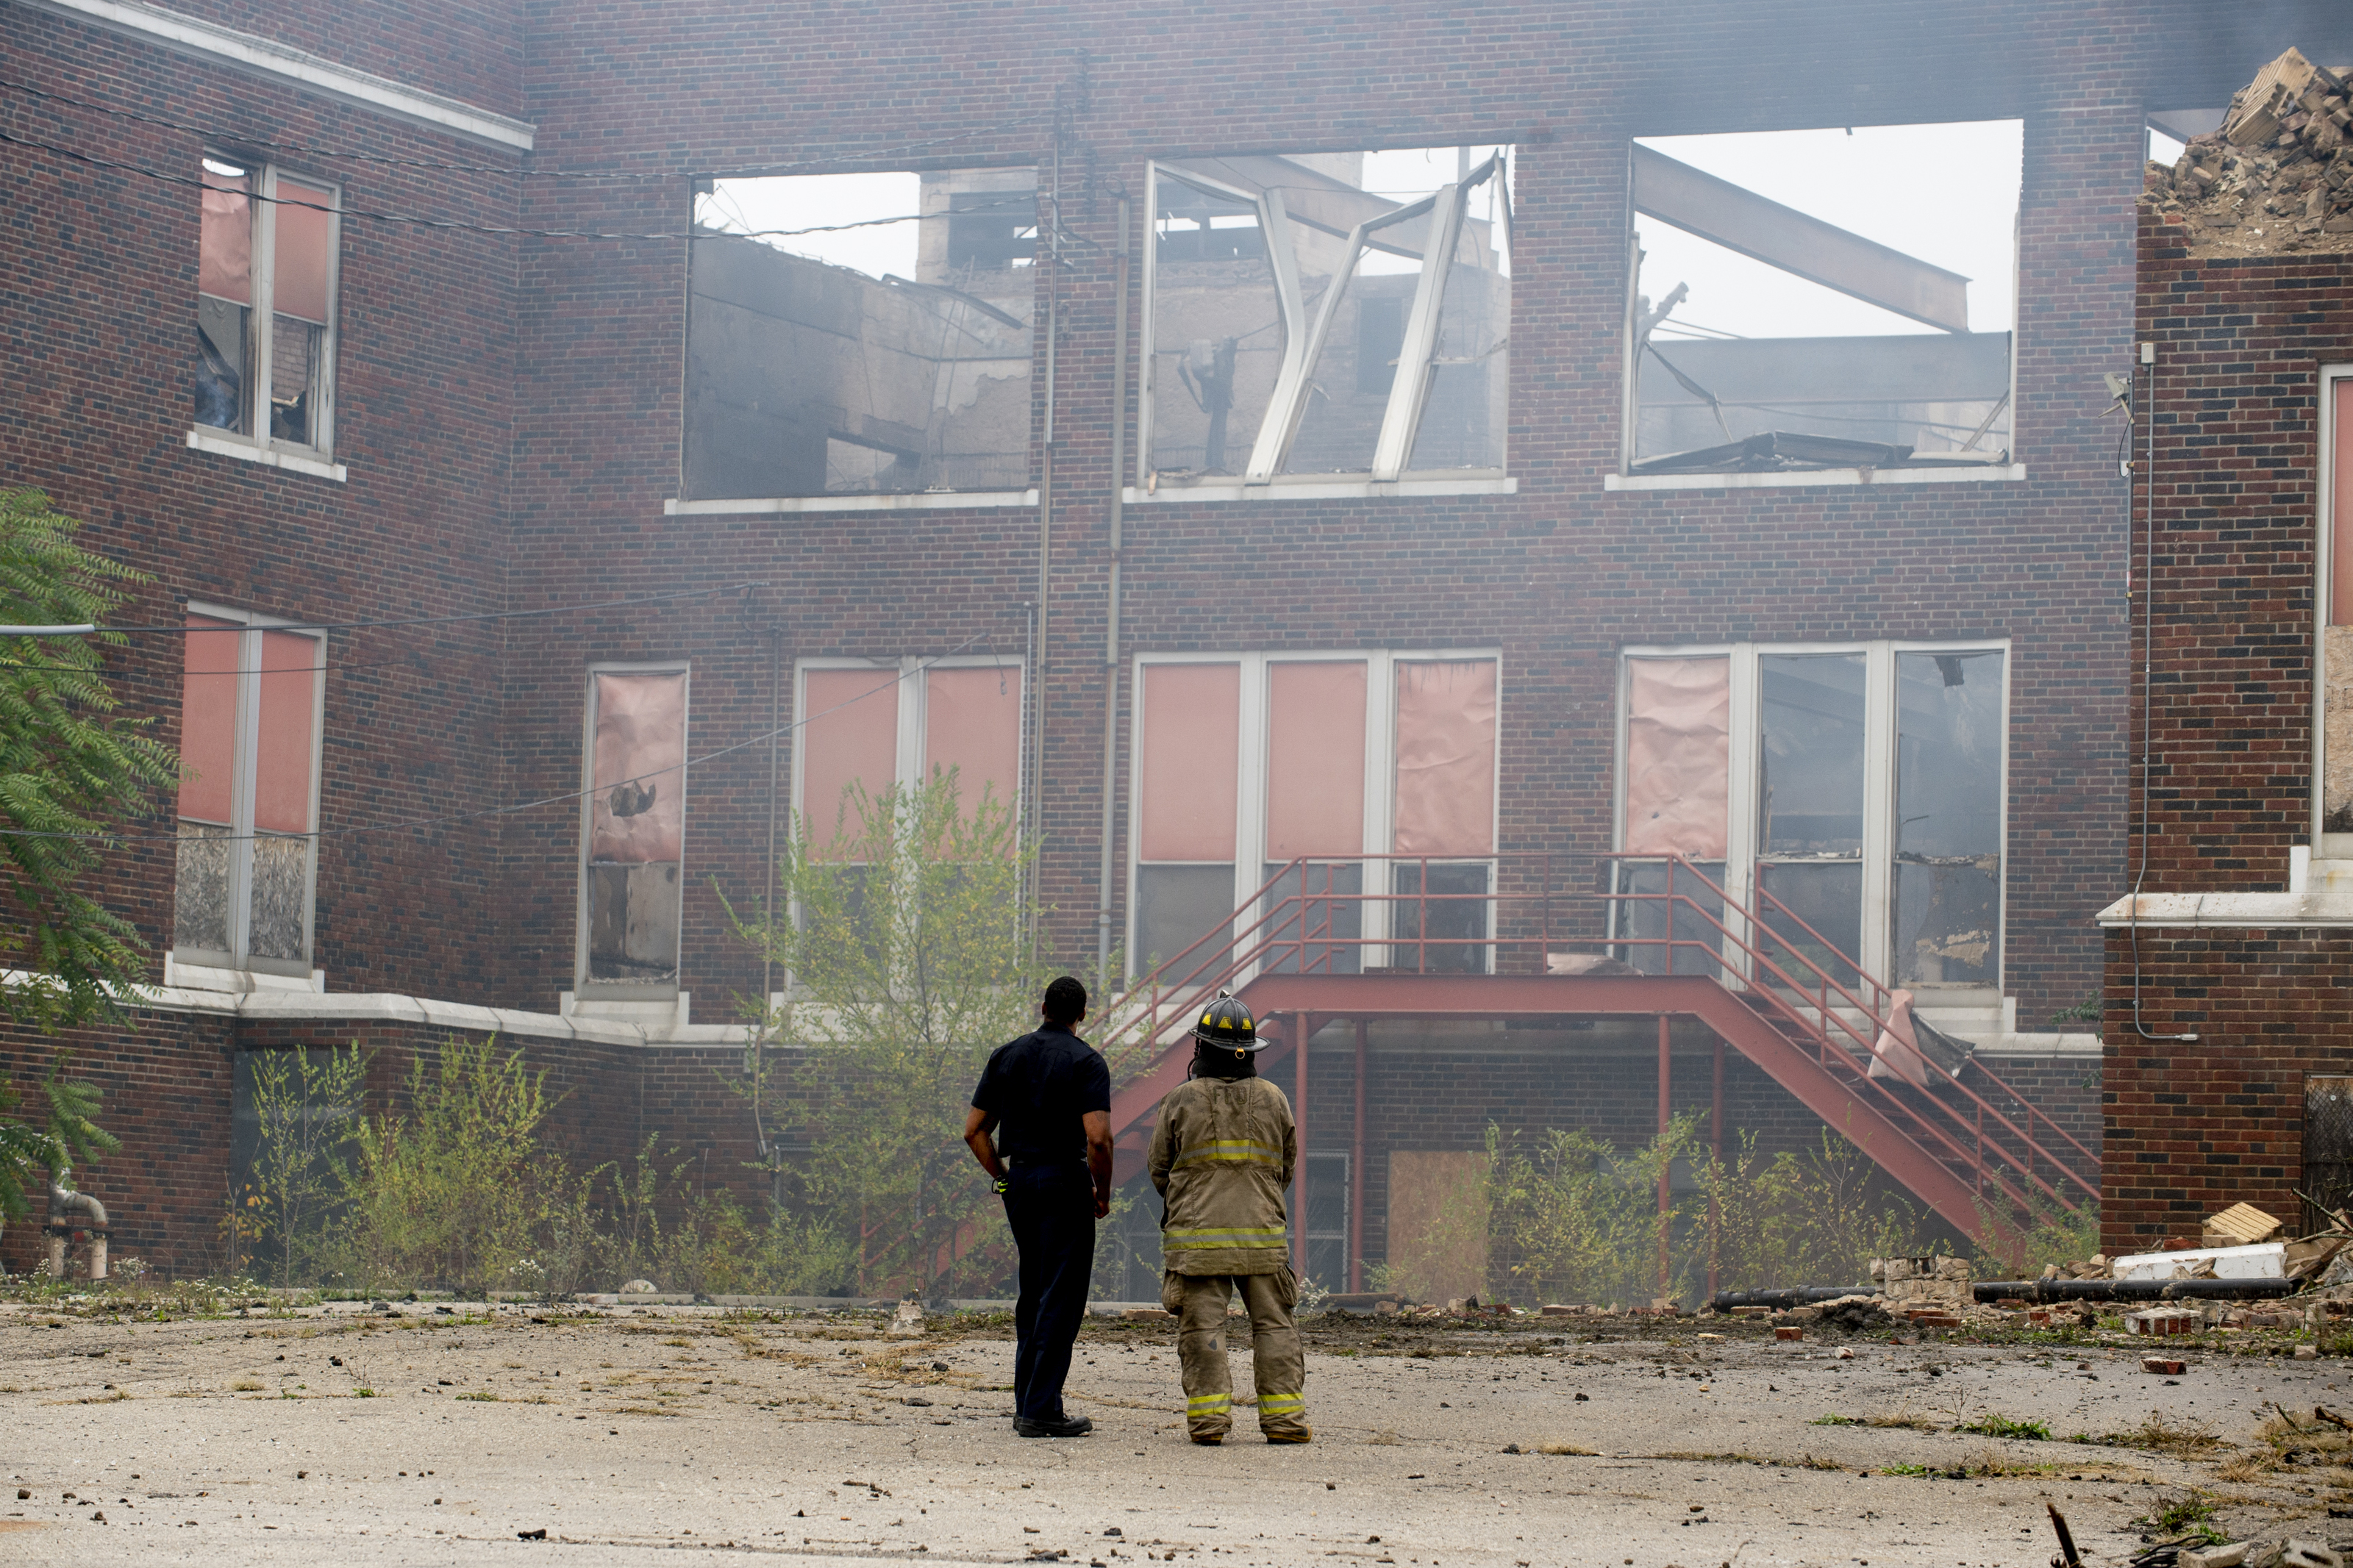 Firefighters work to contain a fire that started at about 12:30 a.m. on Thursday Oct. 7, 2021 at the former Washington Elementary School, located at 1400 N. Vernon Ave. in Flint. The building was built in 1922 before closing in 2013. (Jake May | MLive.com)